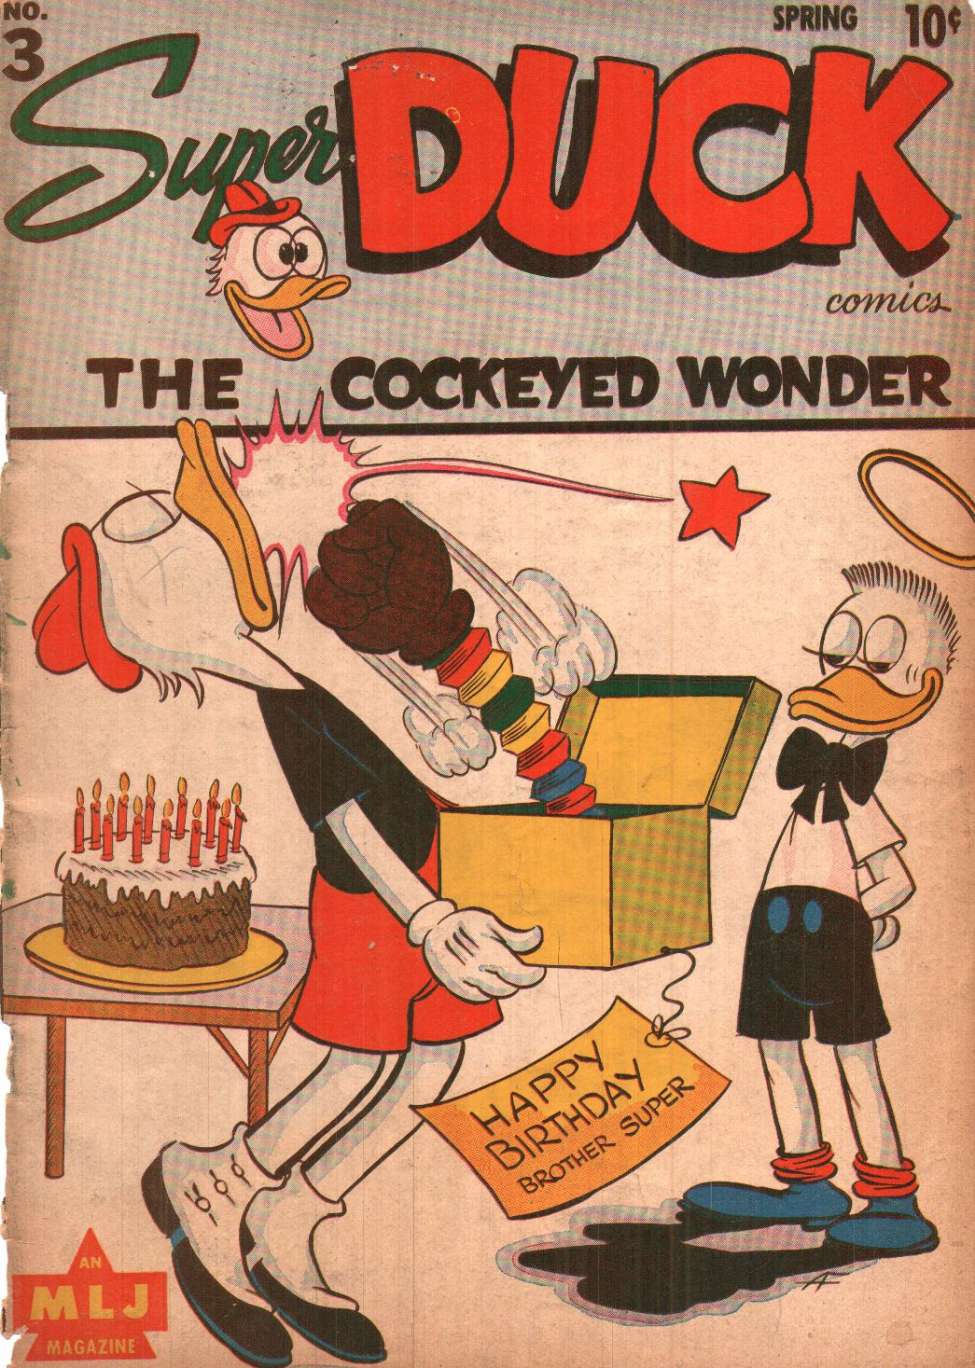 Book Cover For Super Duck 3